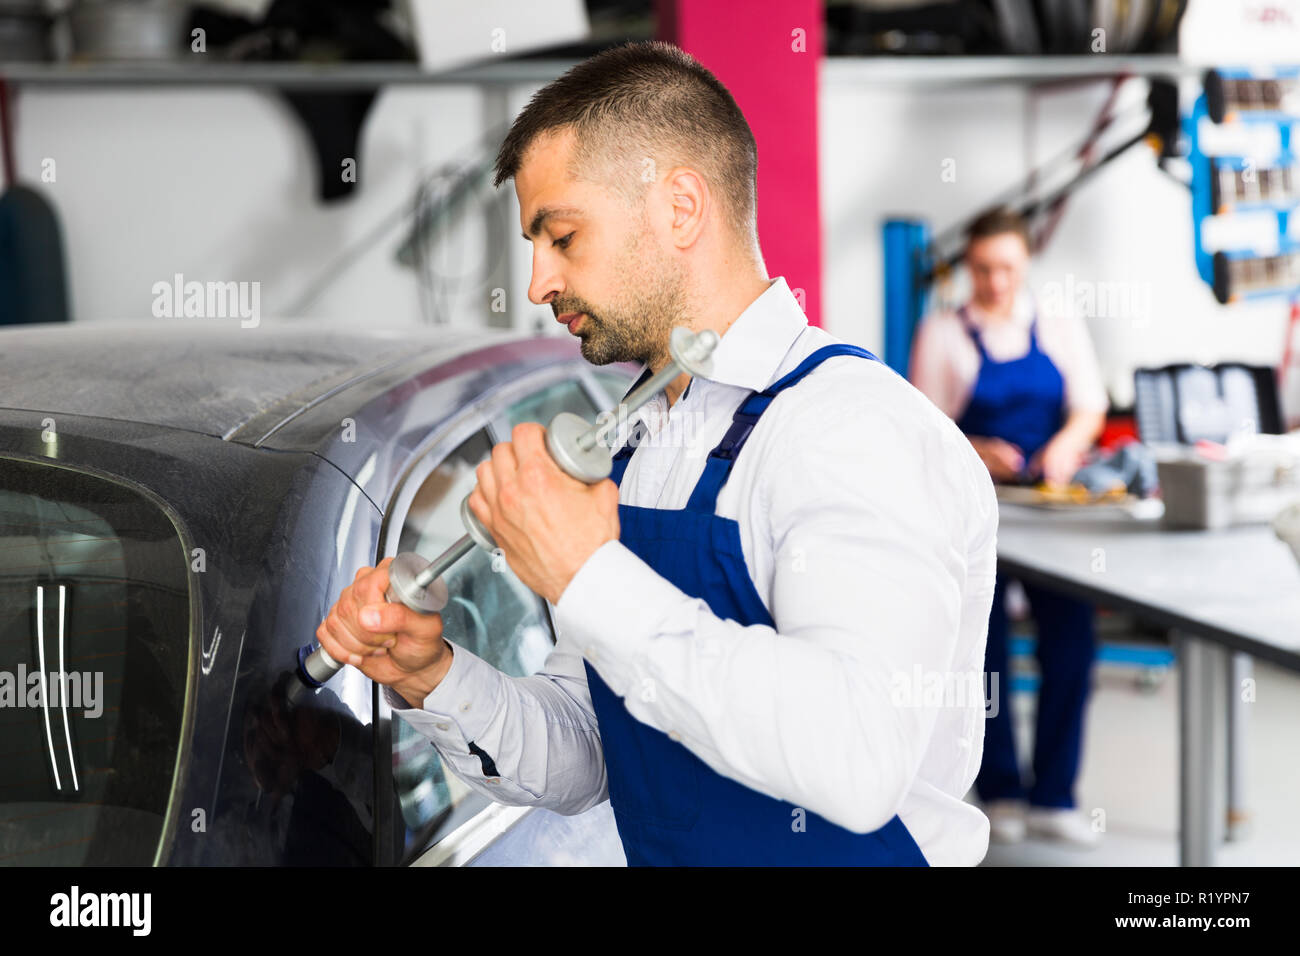 Concentrated mechanic performing car body repair at auto workshop with tools for repairing dents Stock Photo